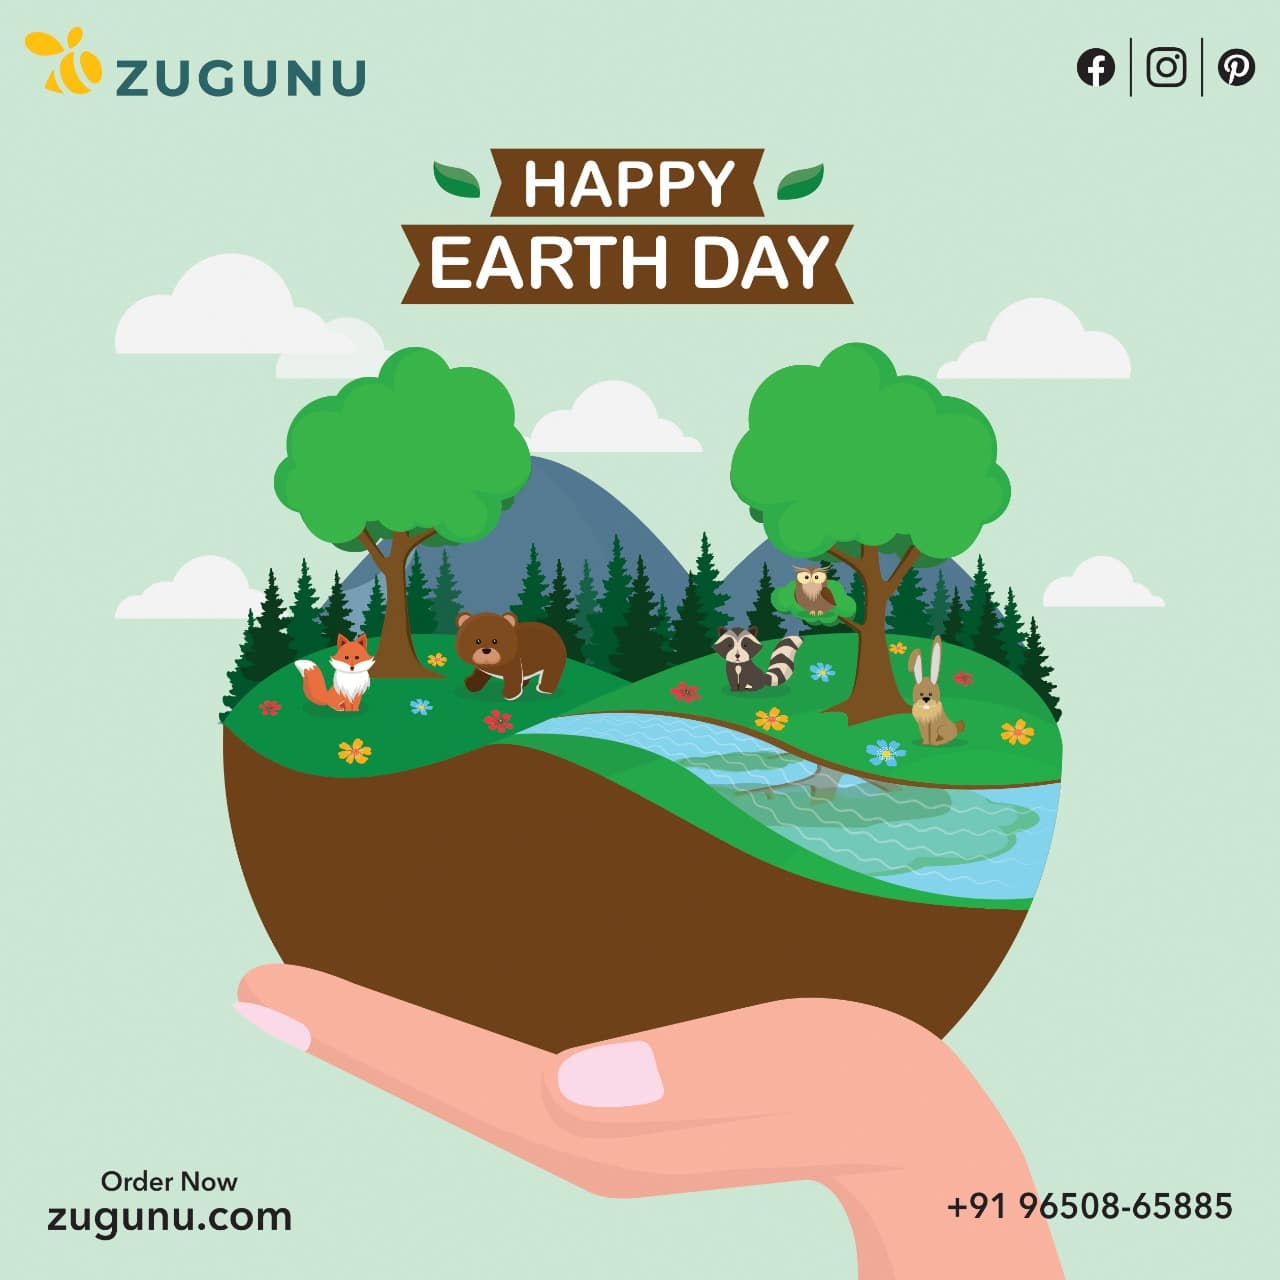 Wishing You All A Very Happy Earth Day1